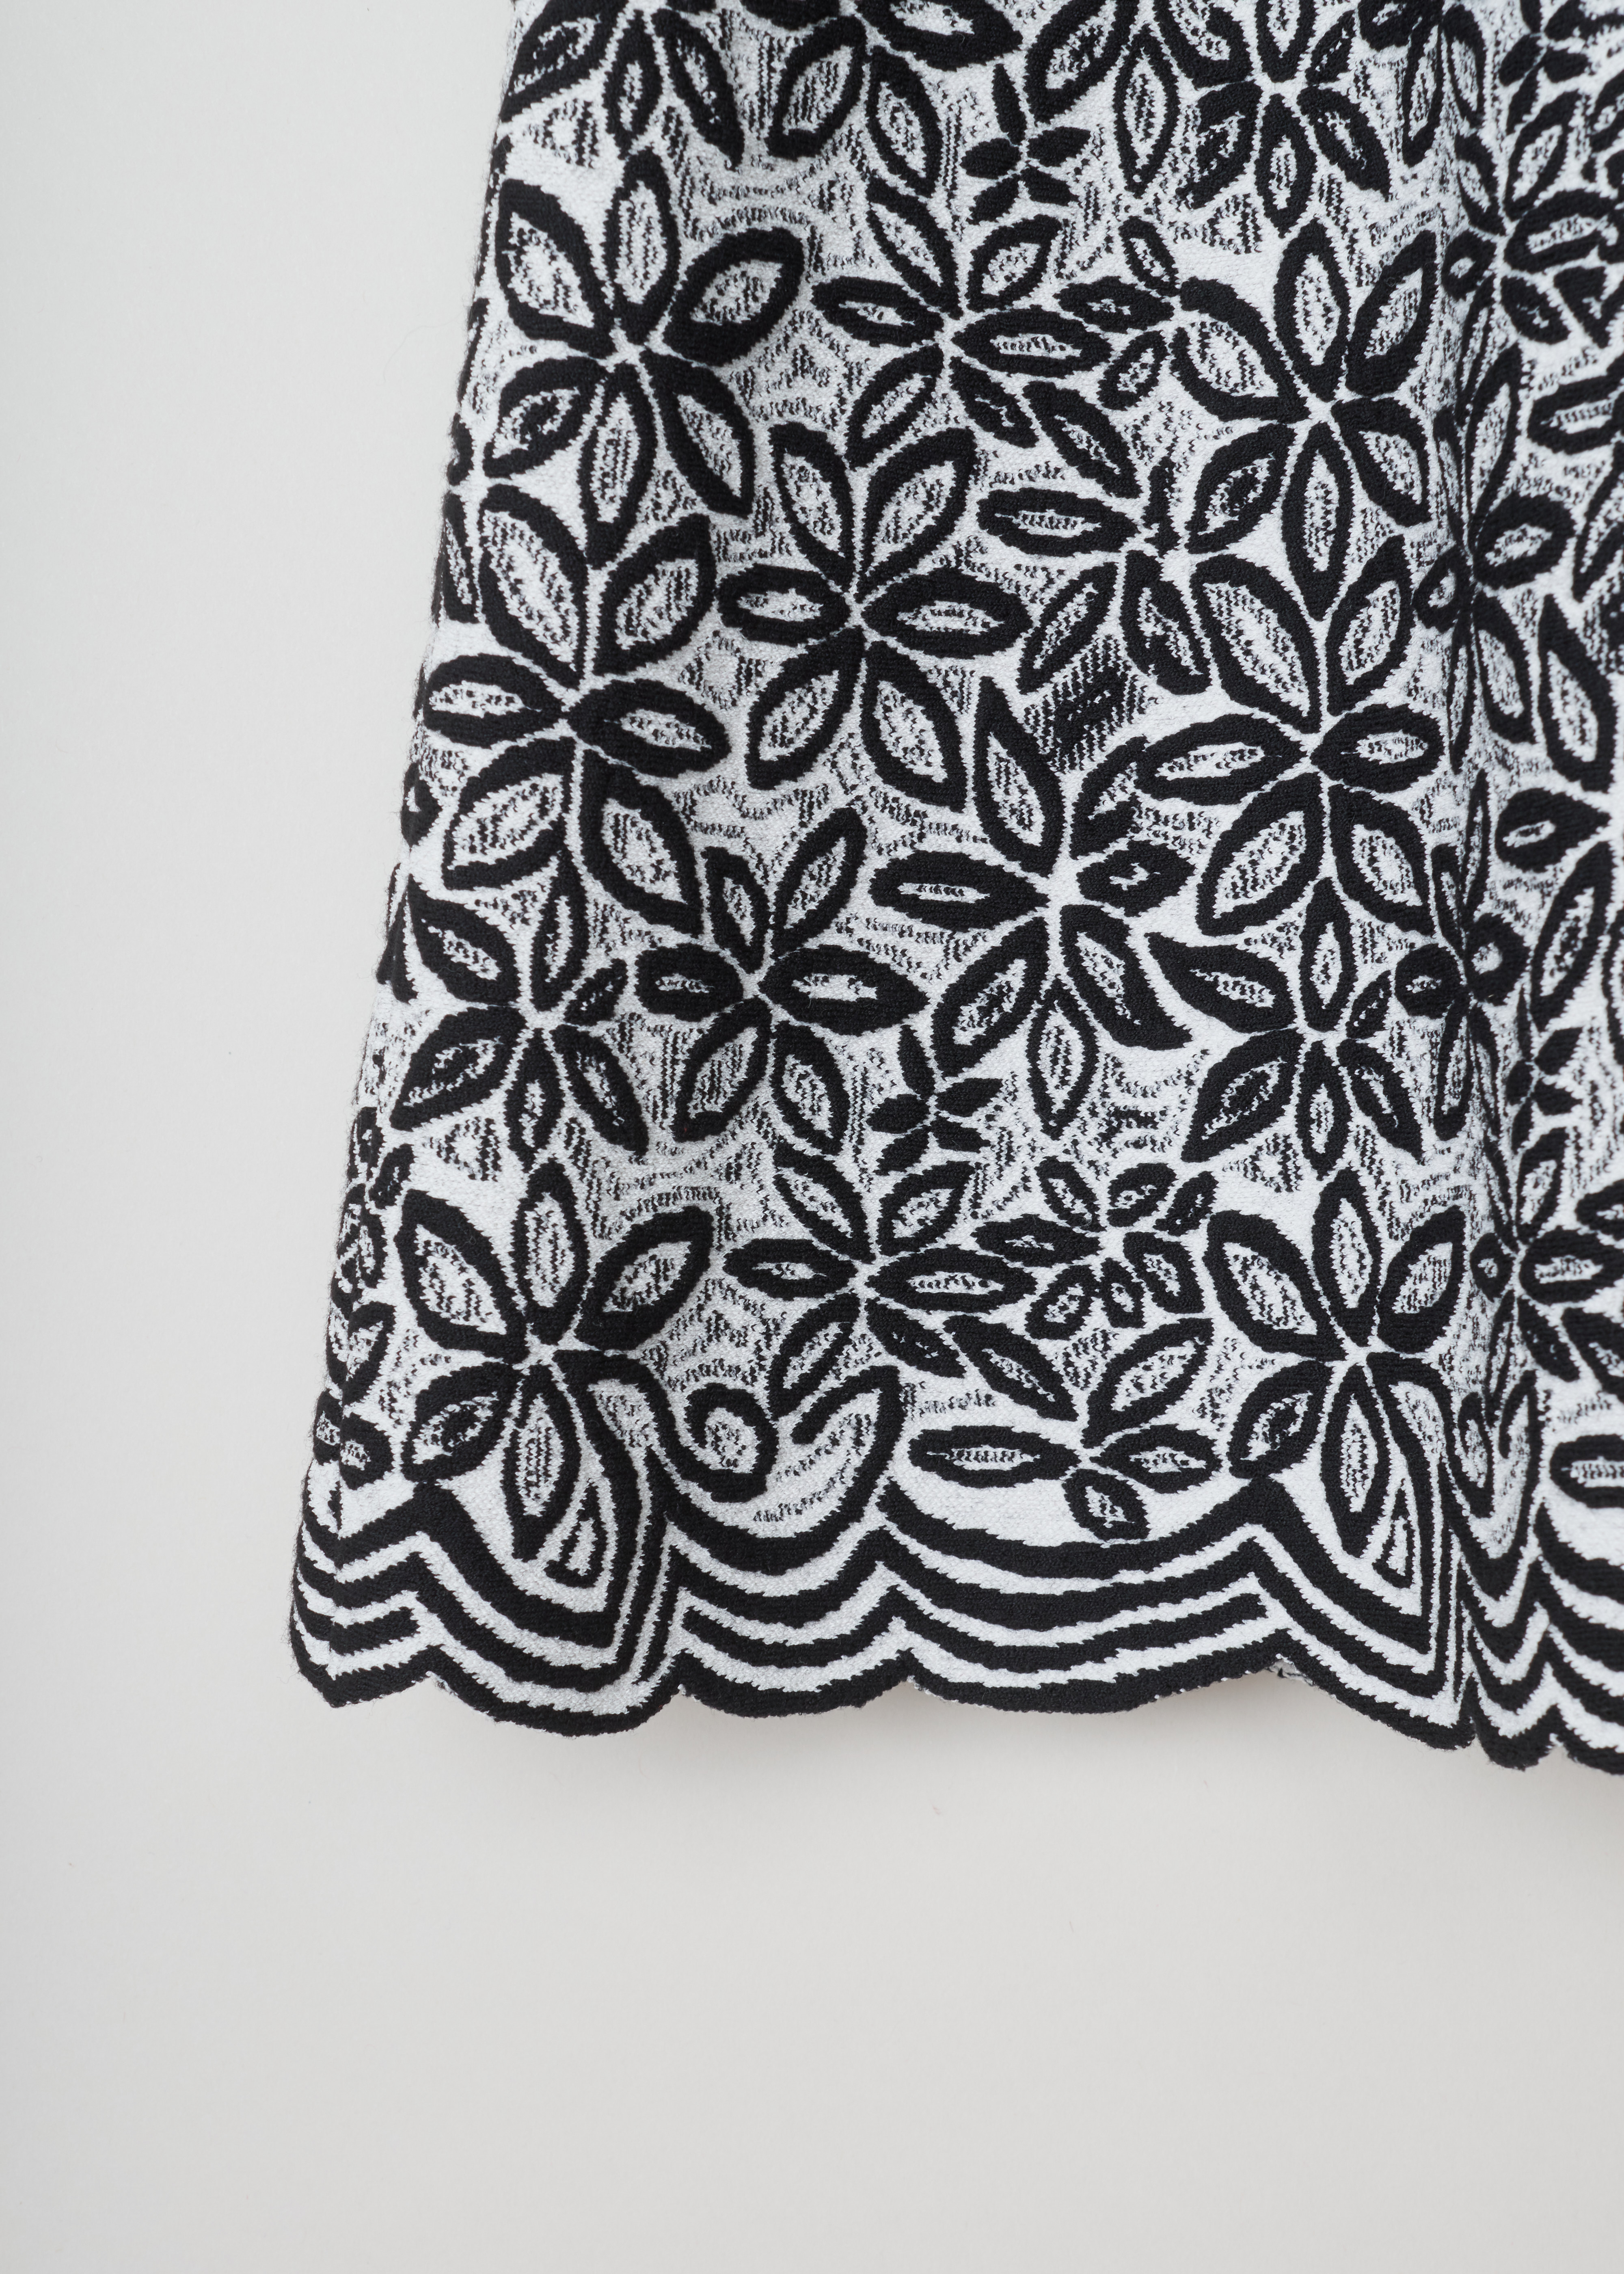 Alaïa, Wool-blend tunic with a flower pattern, 7W9UE52RM353_TUNIQUE_ADENIUM_C009_Blanc/Noir, Grey, Print, Detail 1, Jacquard knitted tunic with a black and white flower motif. The dress has short sleeves, a wide round neckline, an A-line silhouette and scalloped hems.

